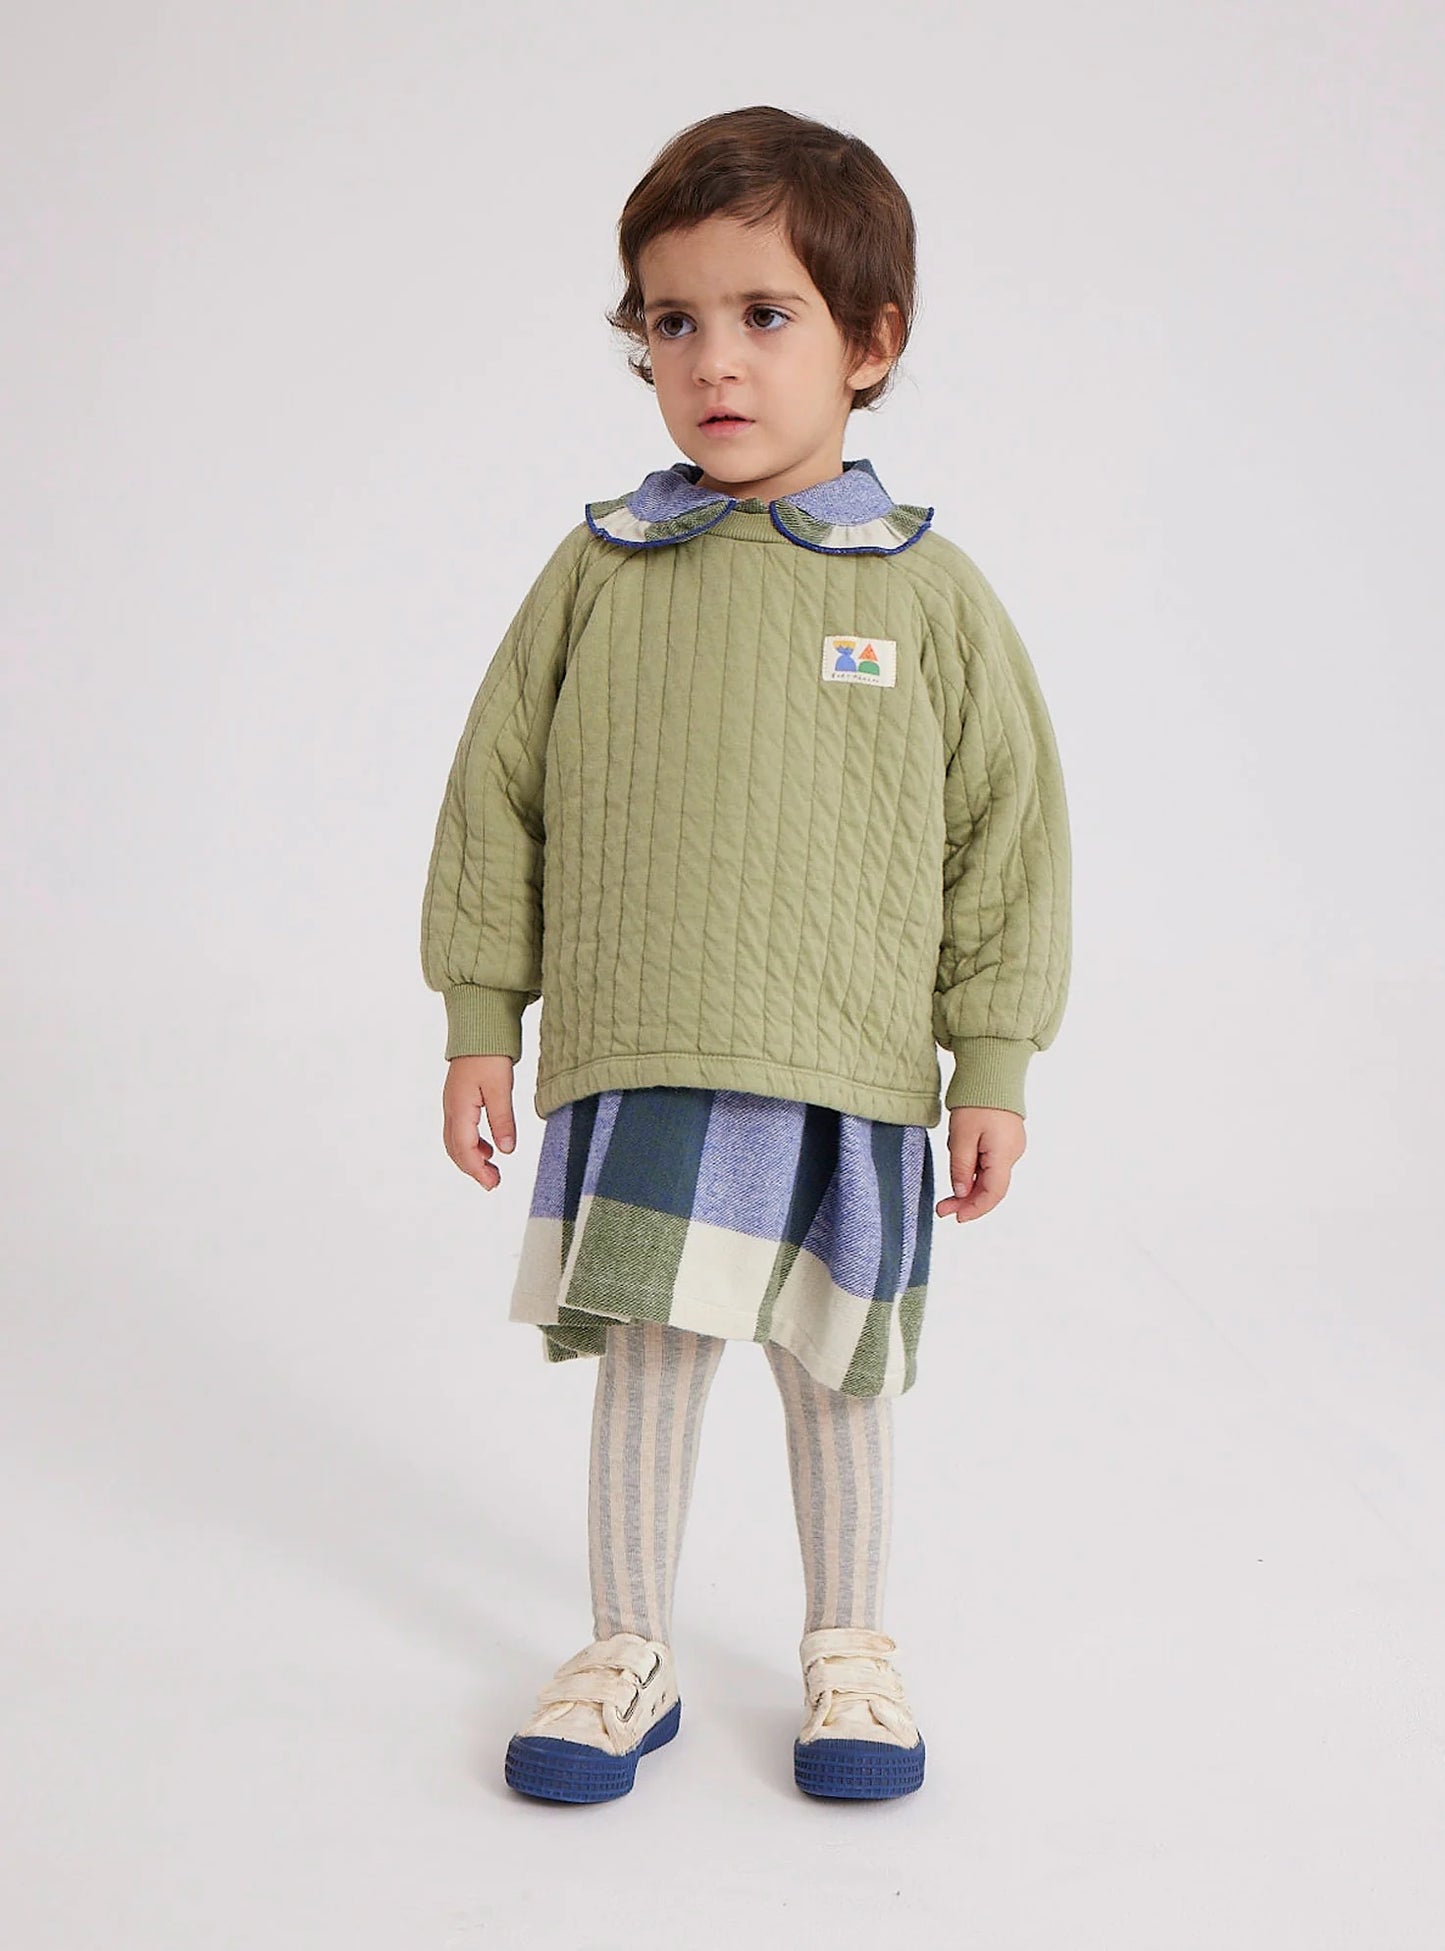 Bobo Choses Baby Quilted Sweatshirt